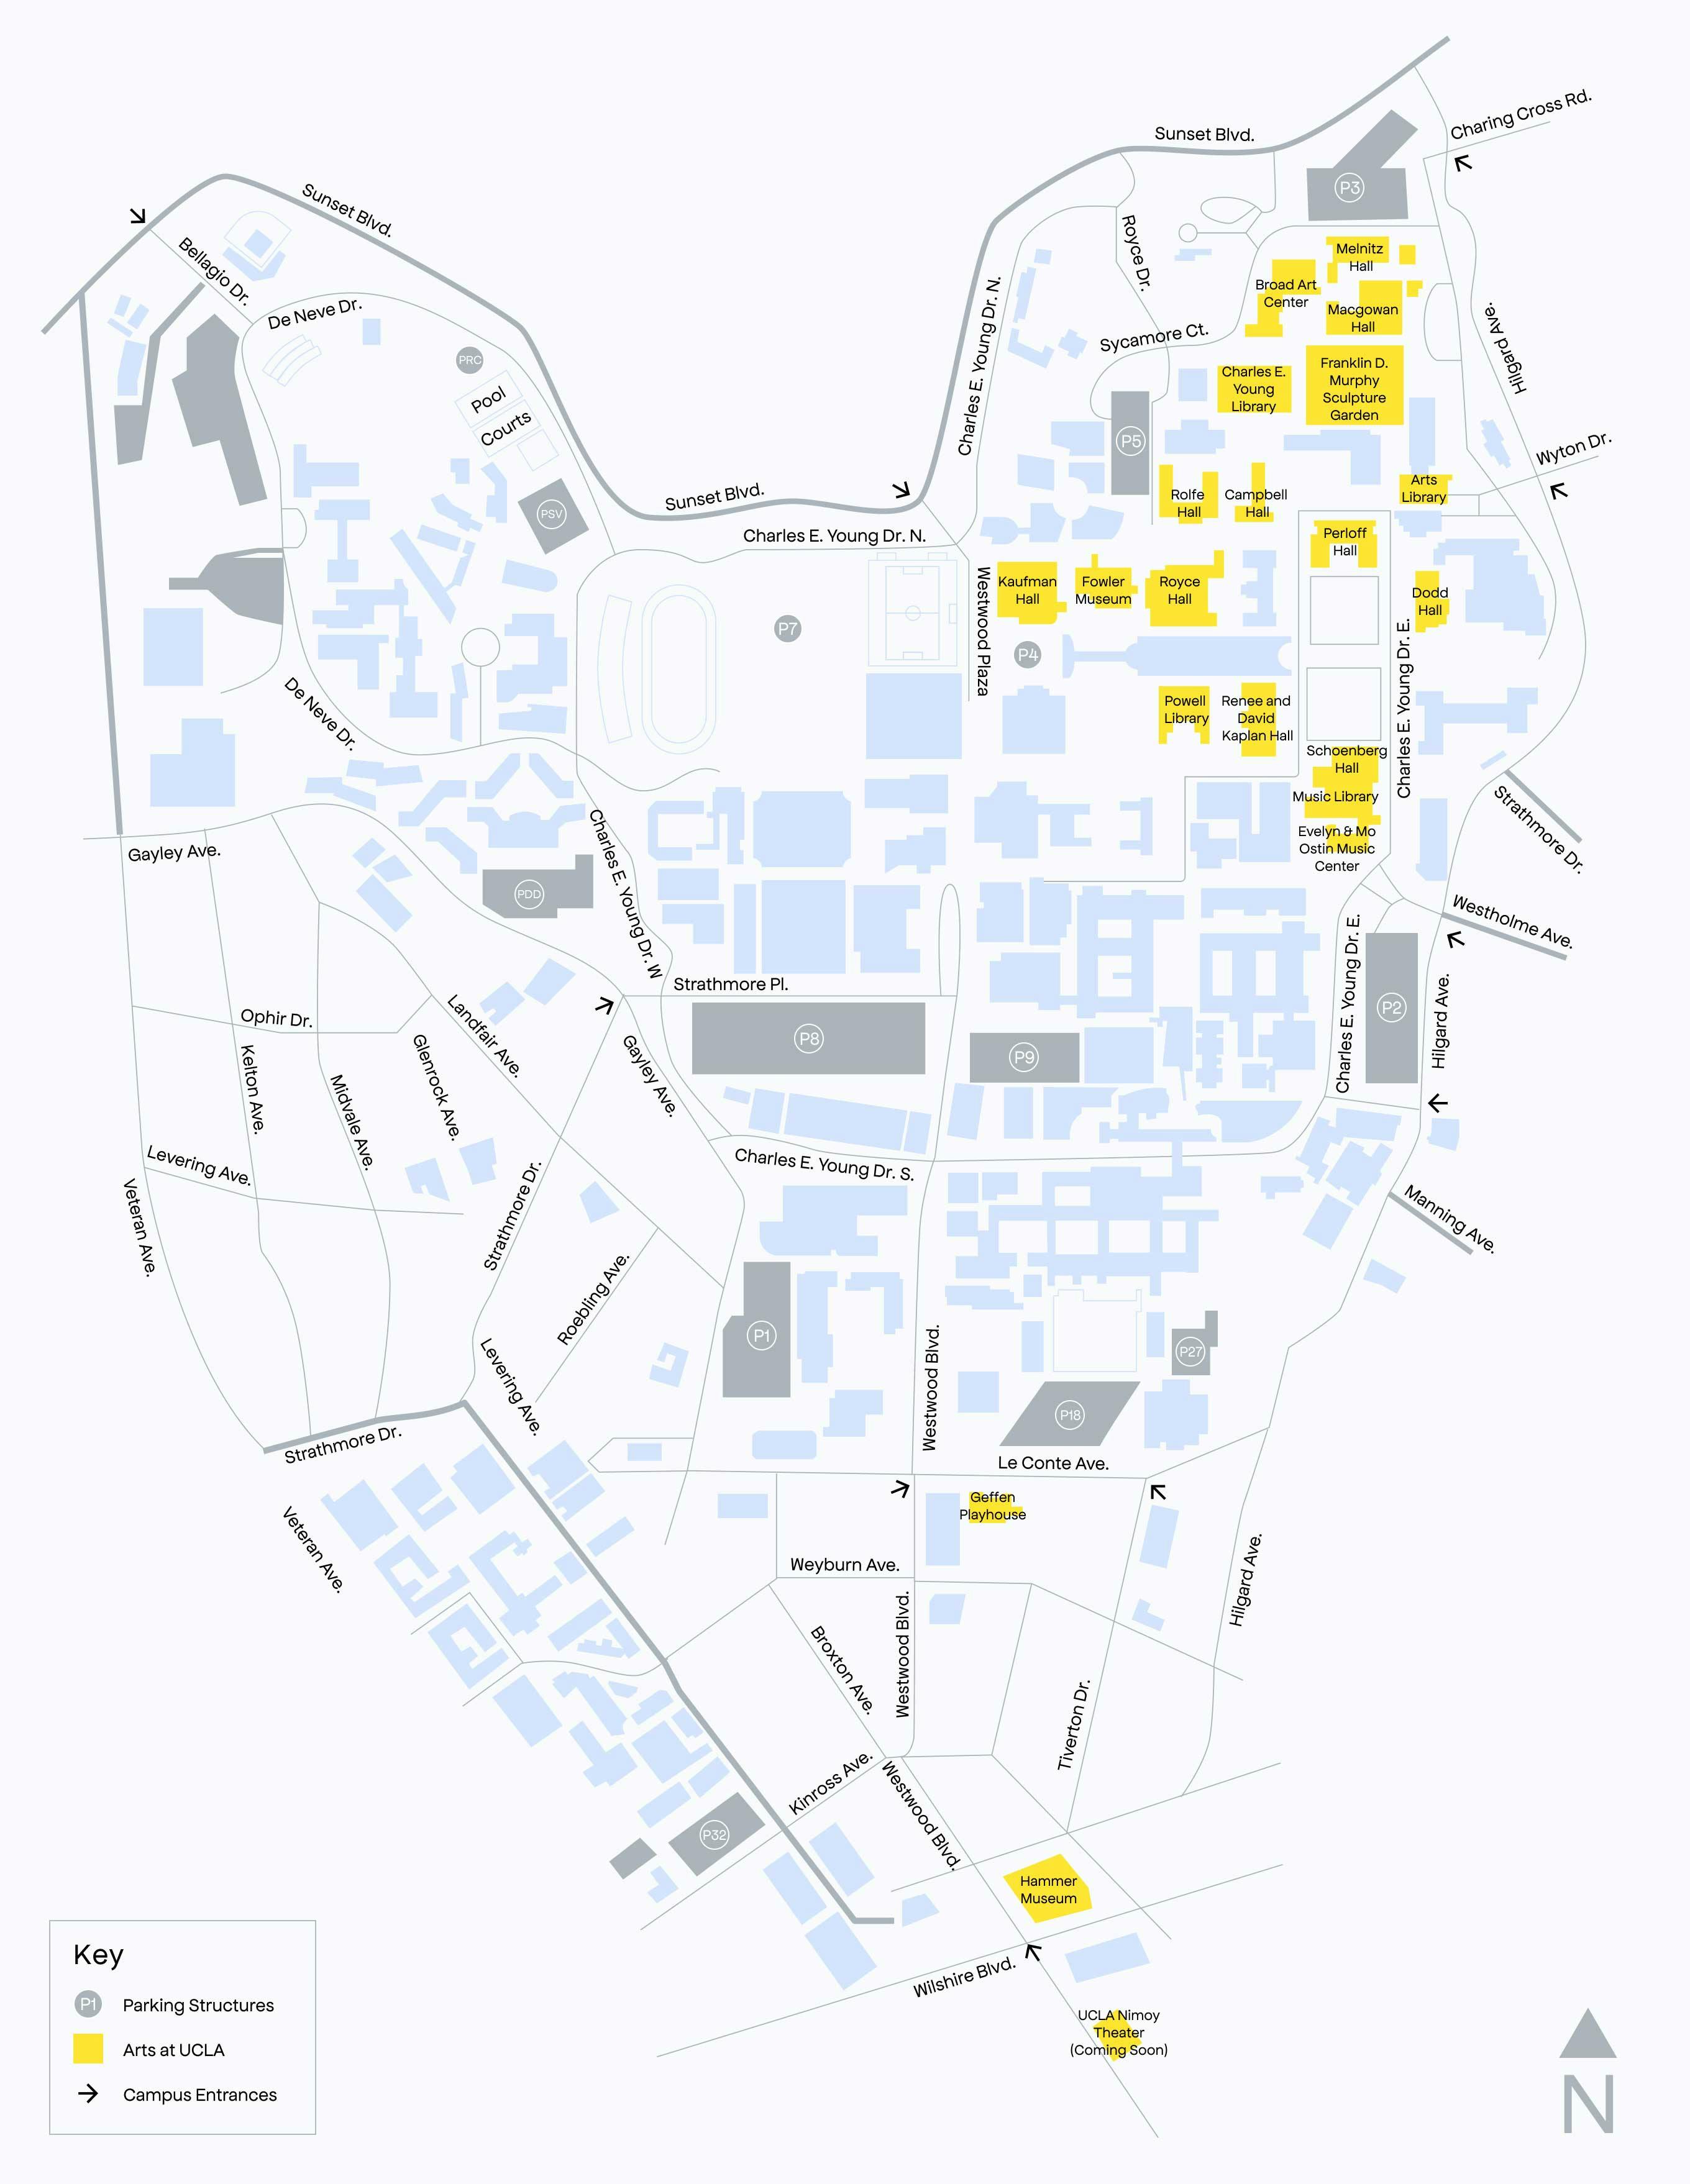 A map of the UCLA Campus with the arts buildings highlighted.